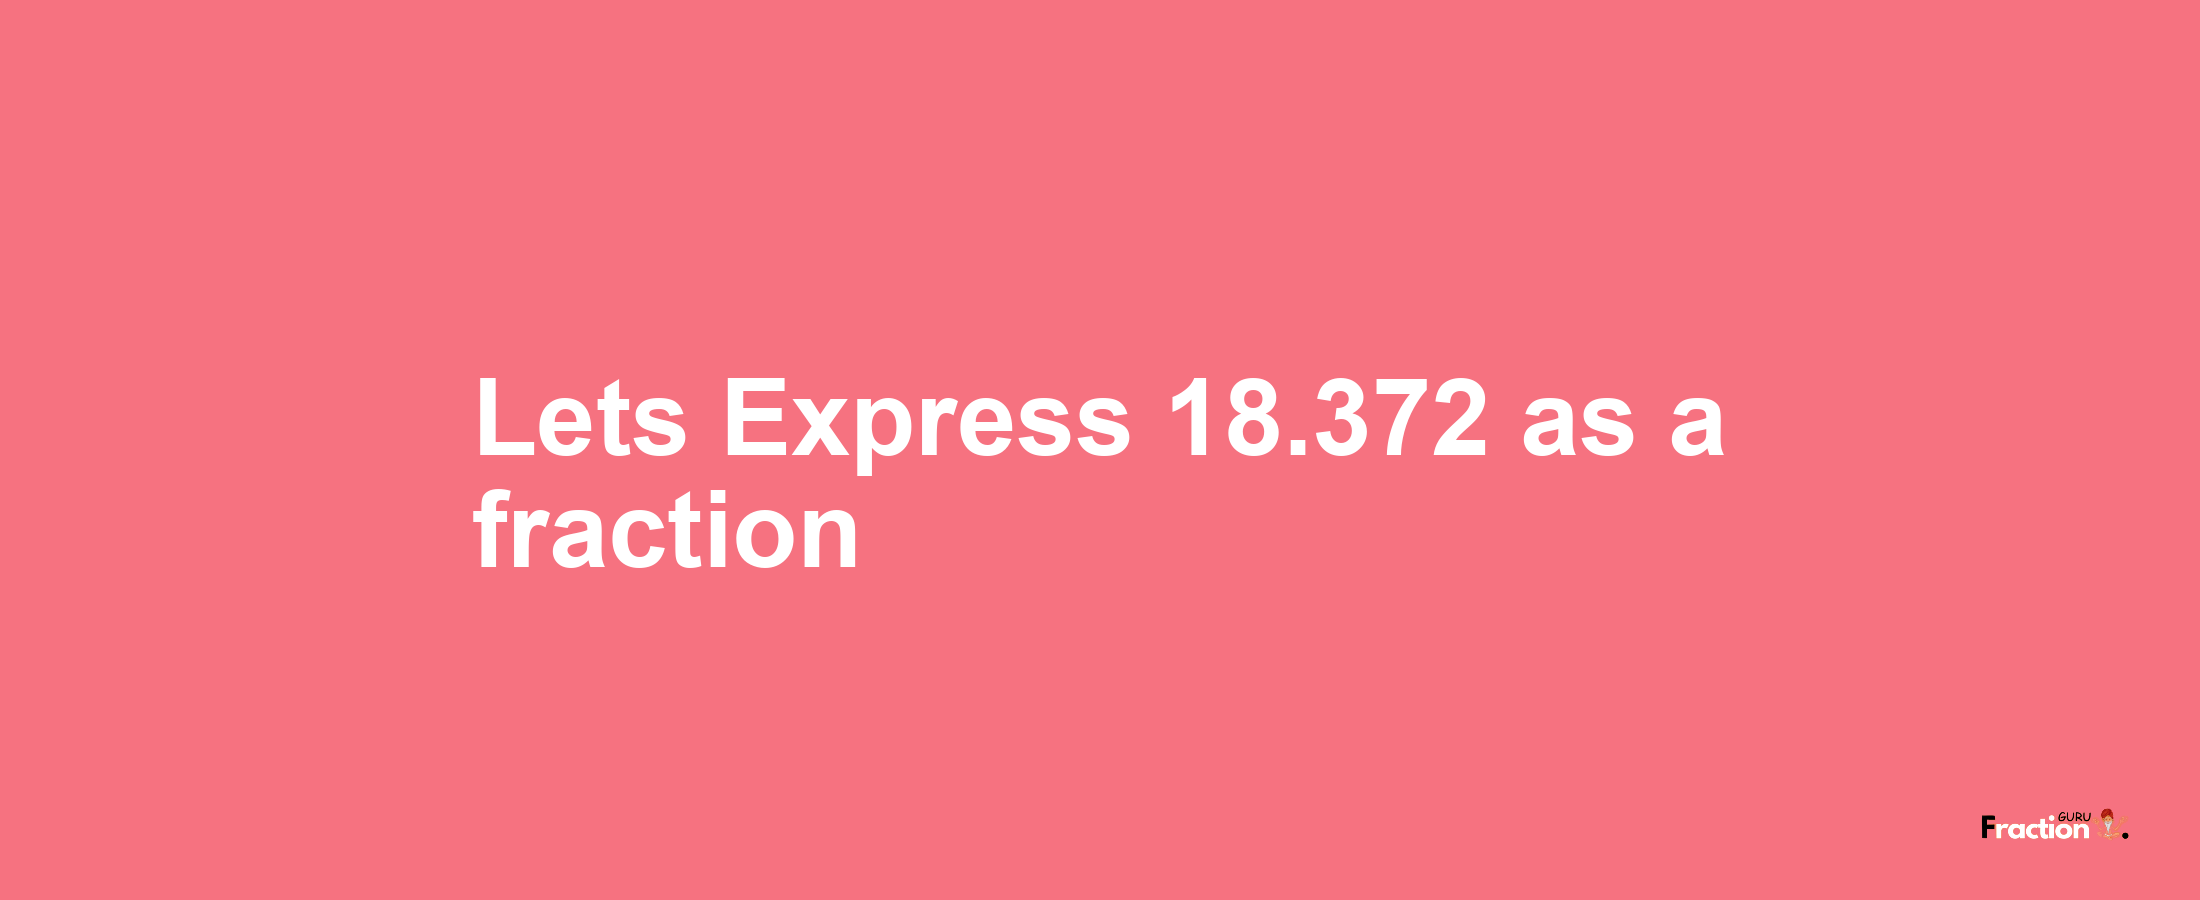 Lets Express 18.372 as afraction